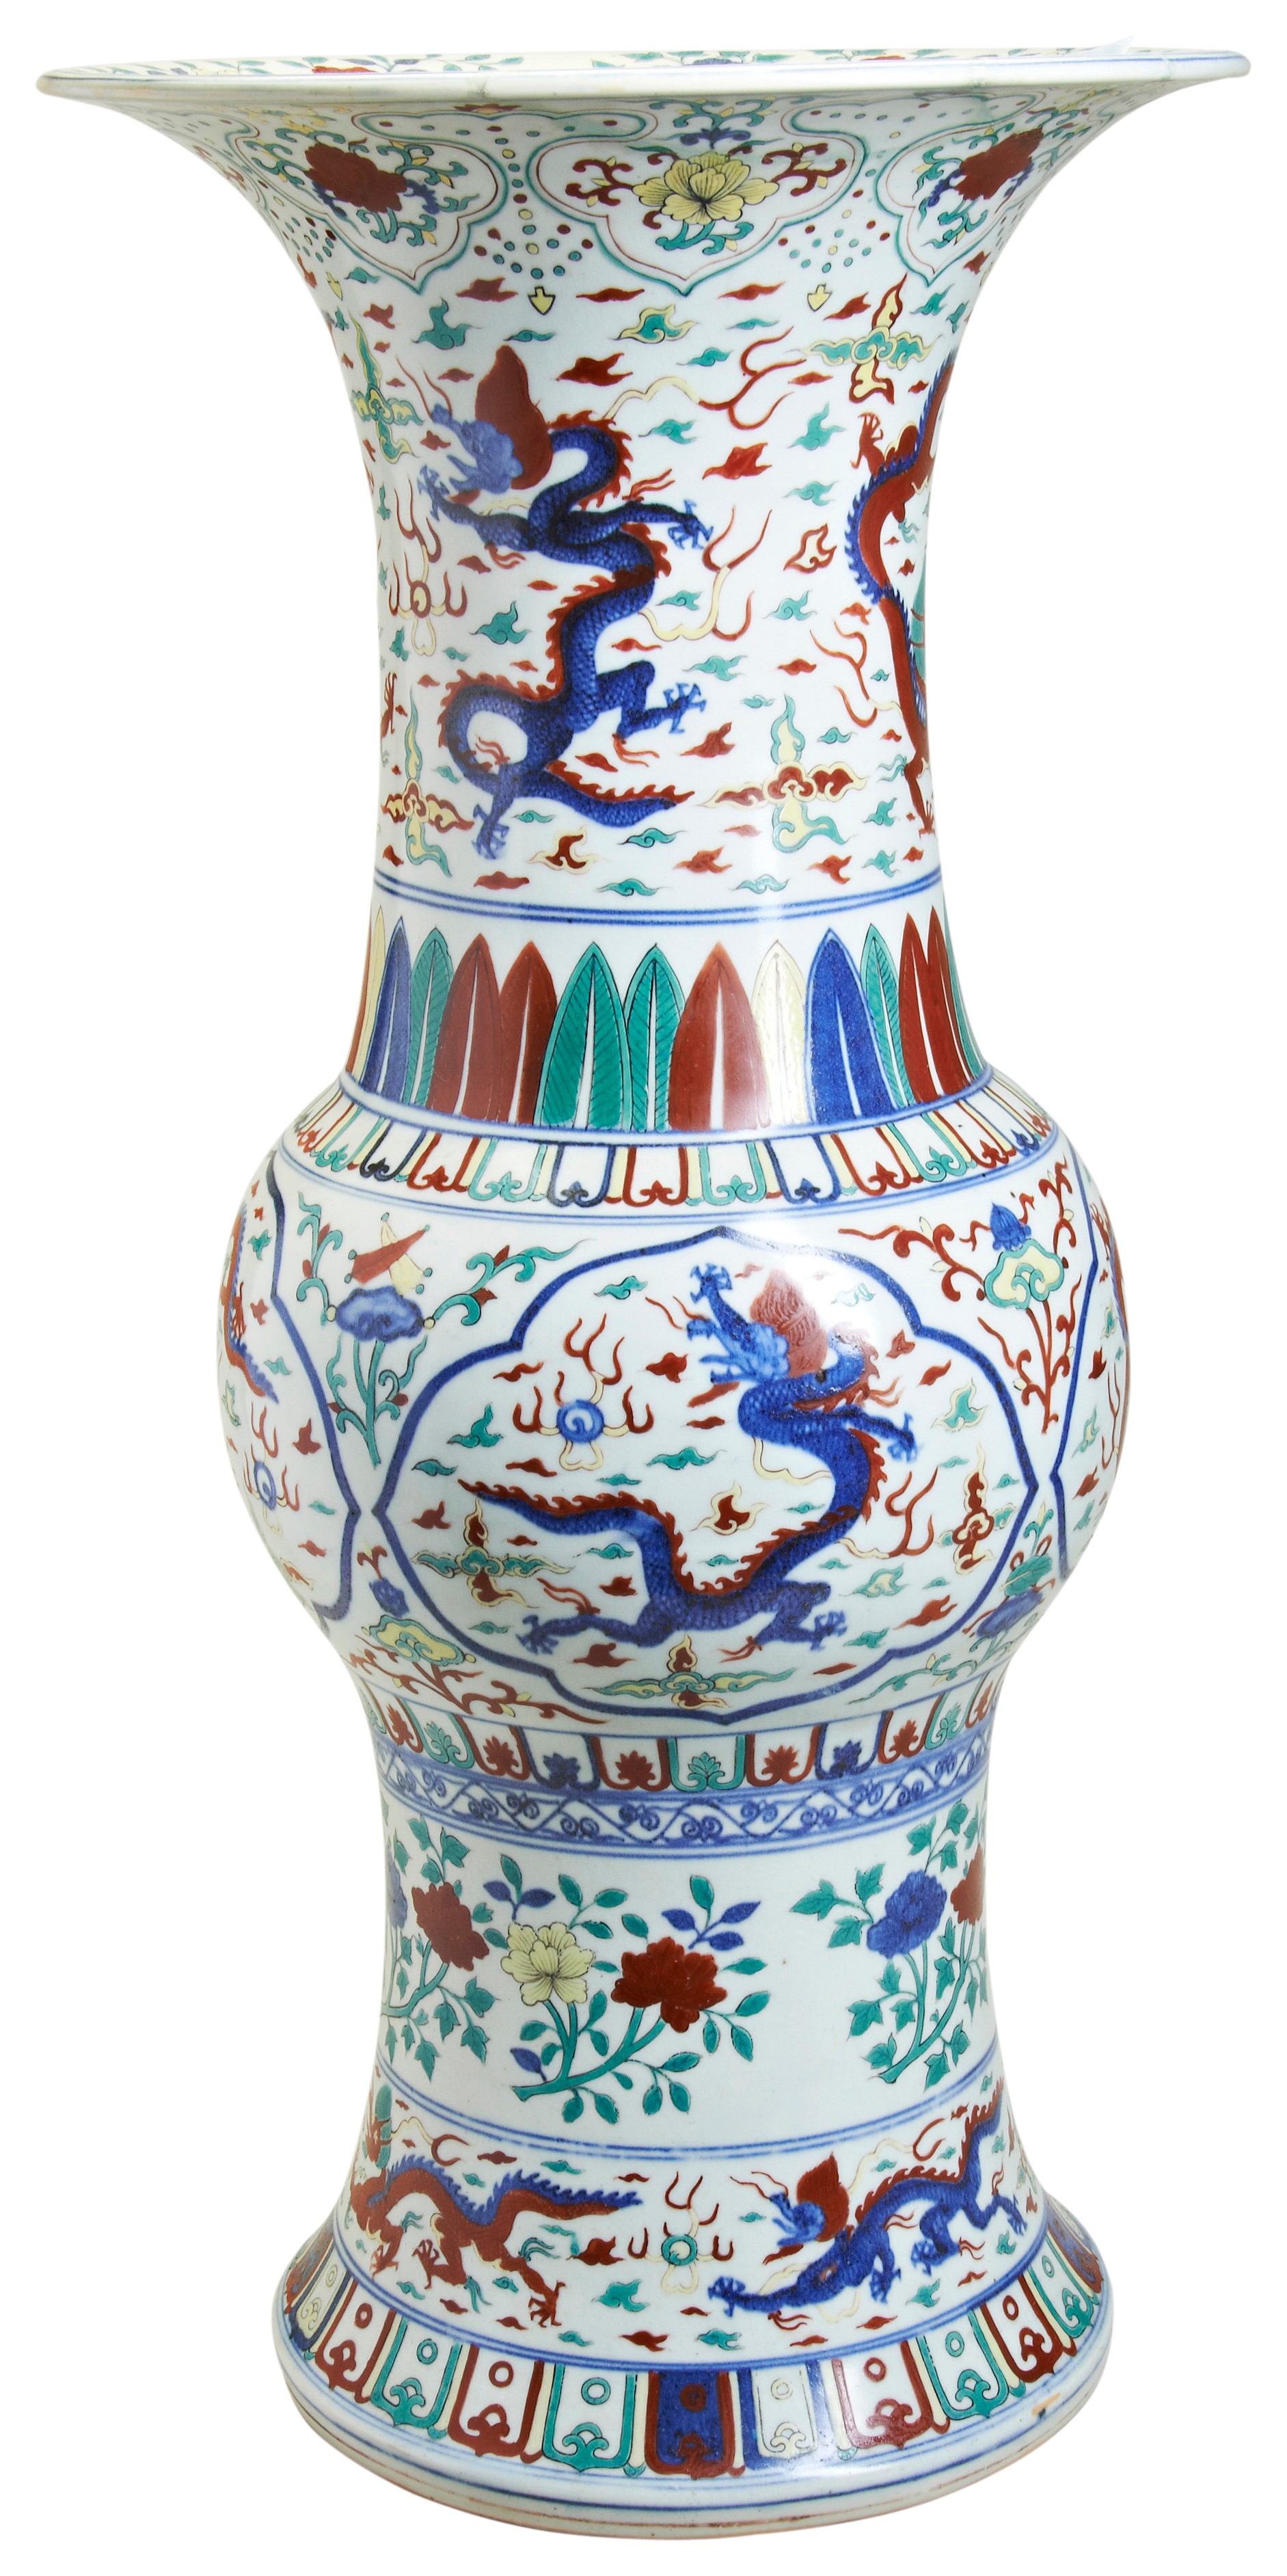 A MASSIVE WUCAI VASE, GU  19TH / 20TH CENTURY  painted with blue and red dragons, and also